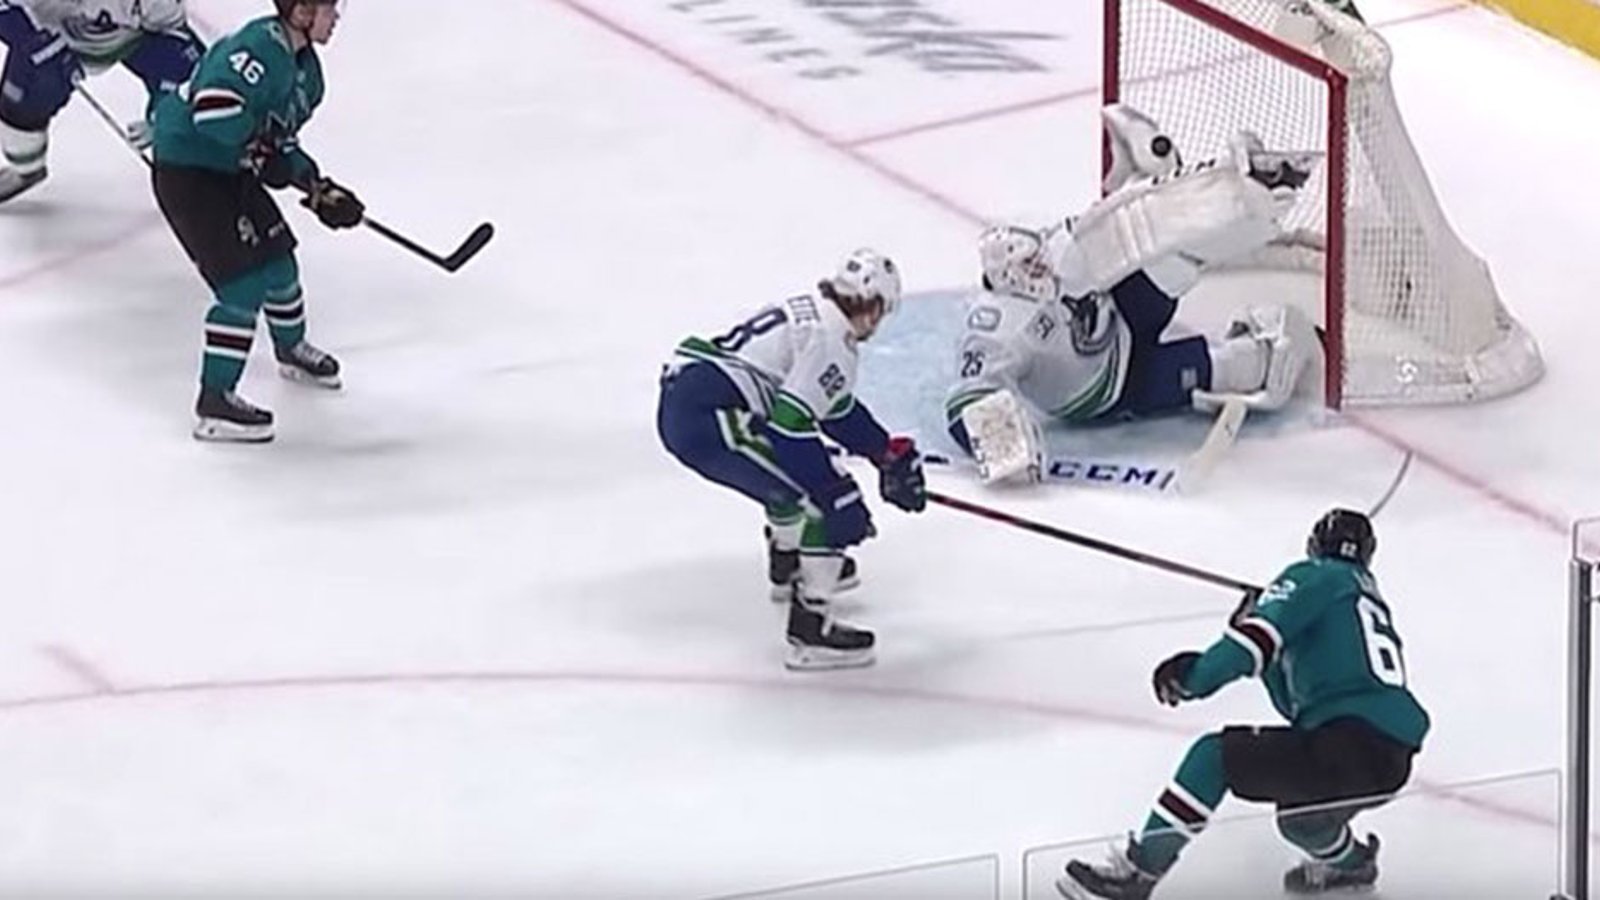 Markstrom pulls off a save of the year candidate